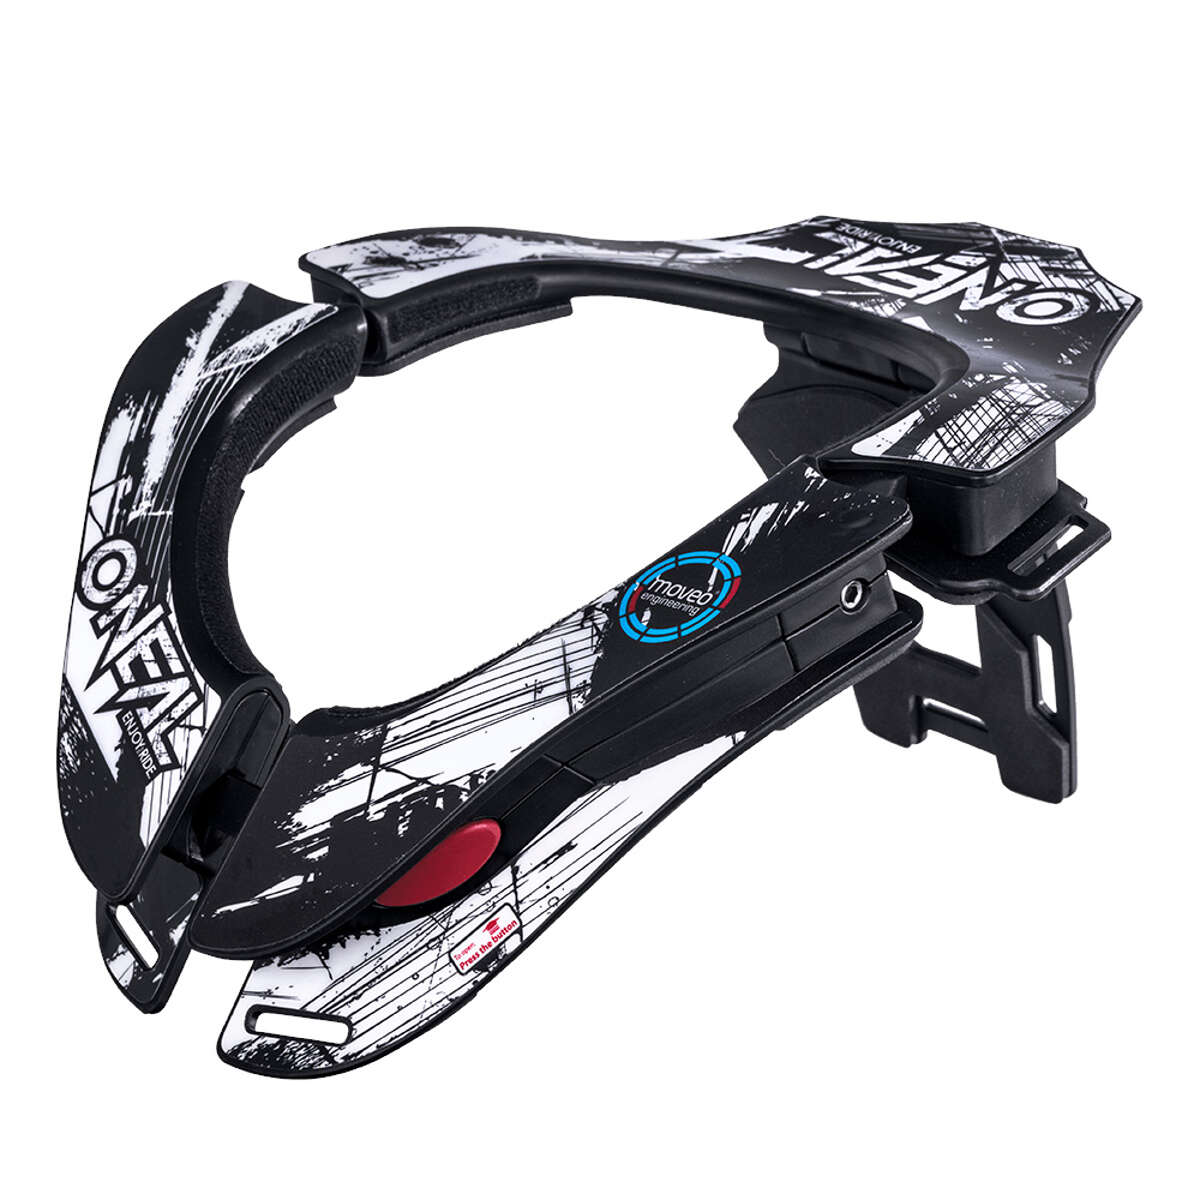 O'Neal Protection Cervicale Tron Shocker - Black/White